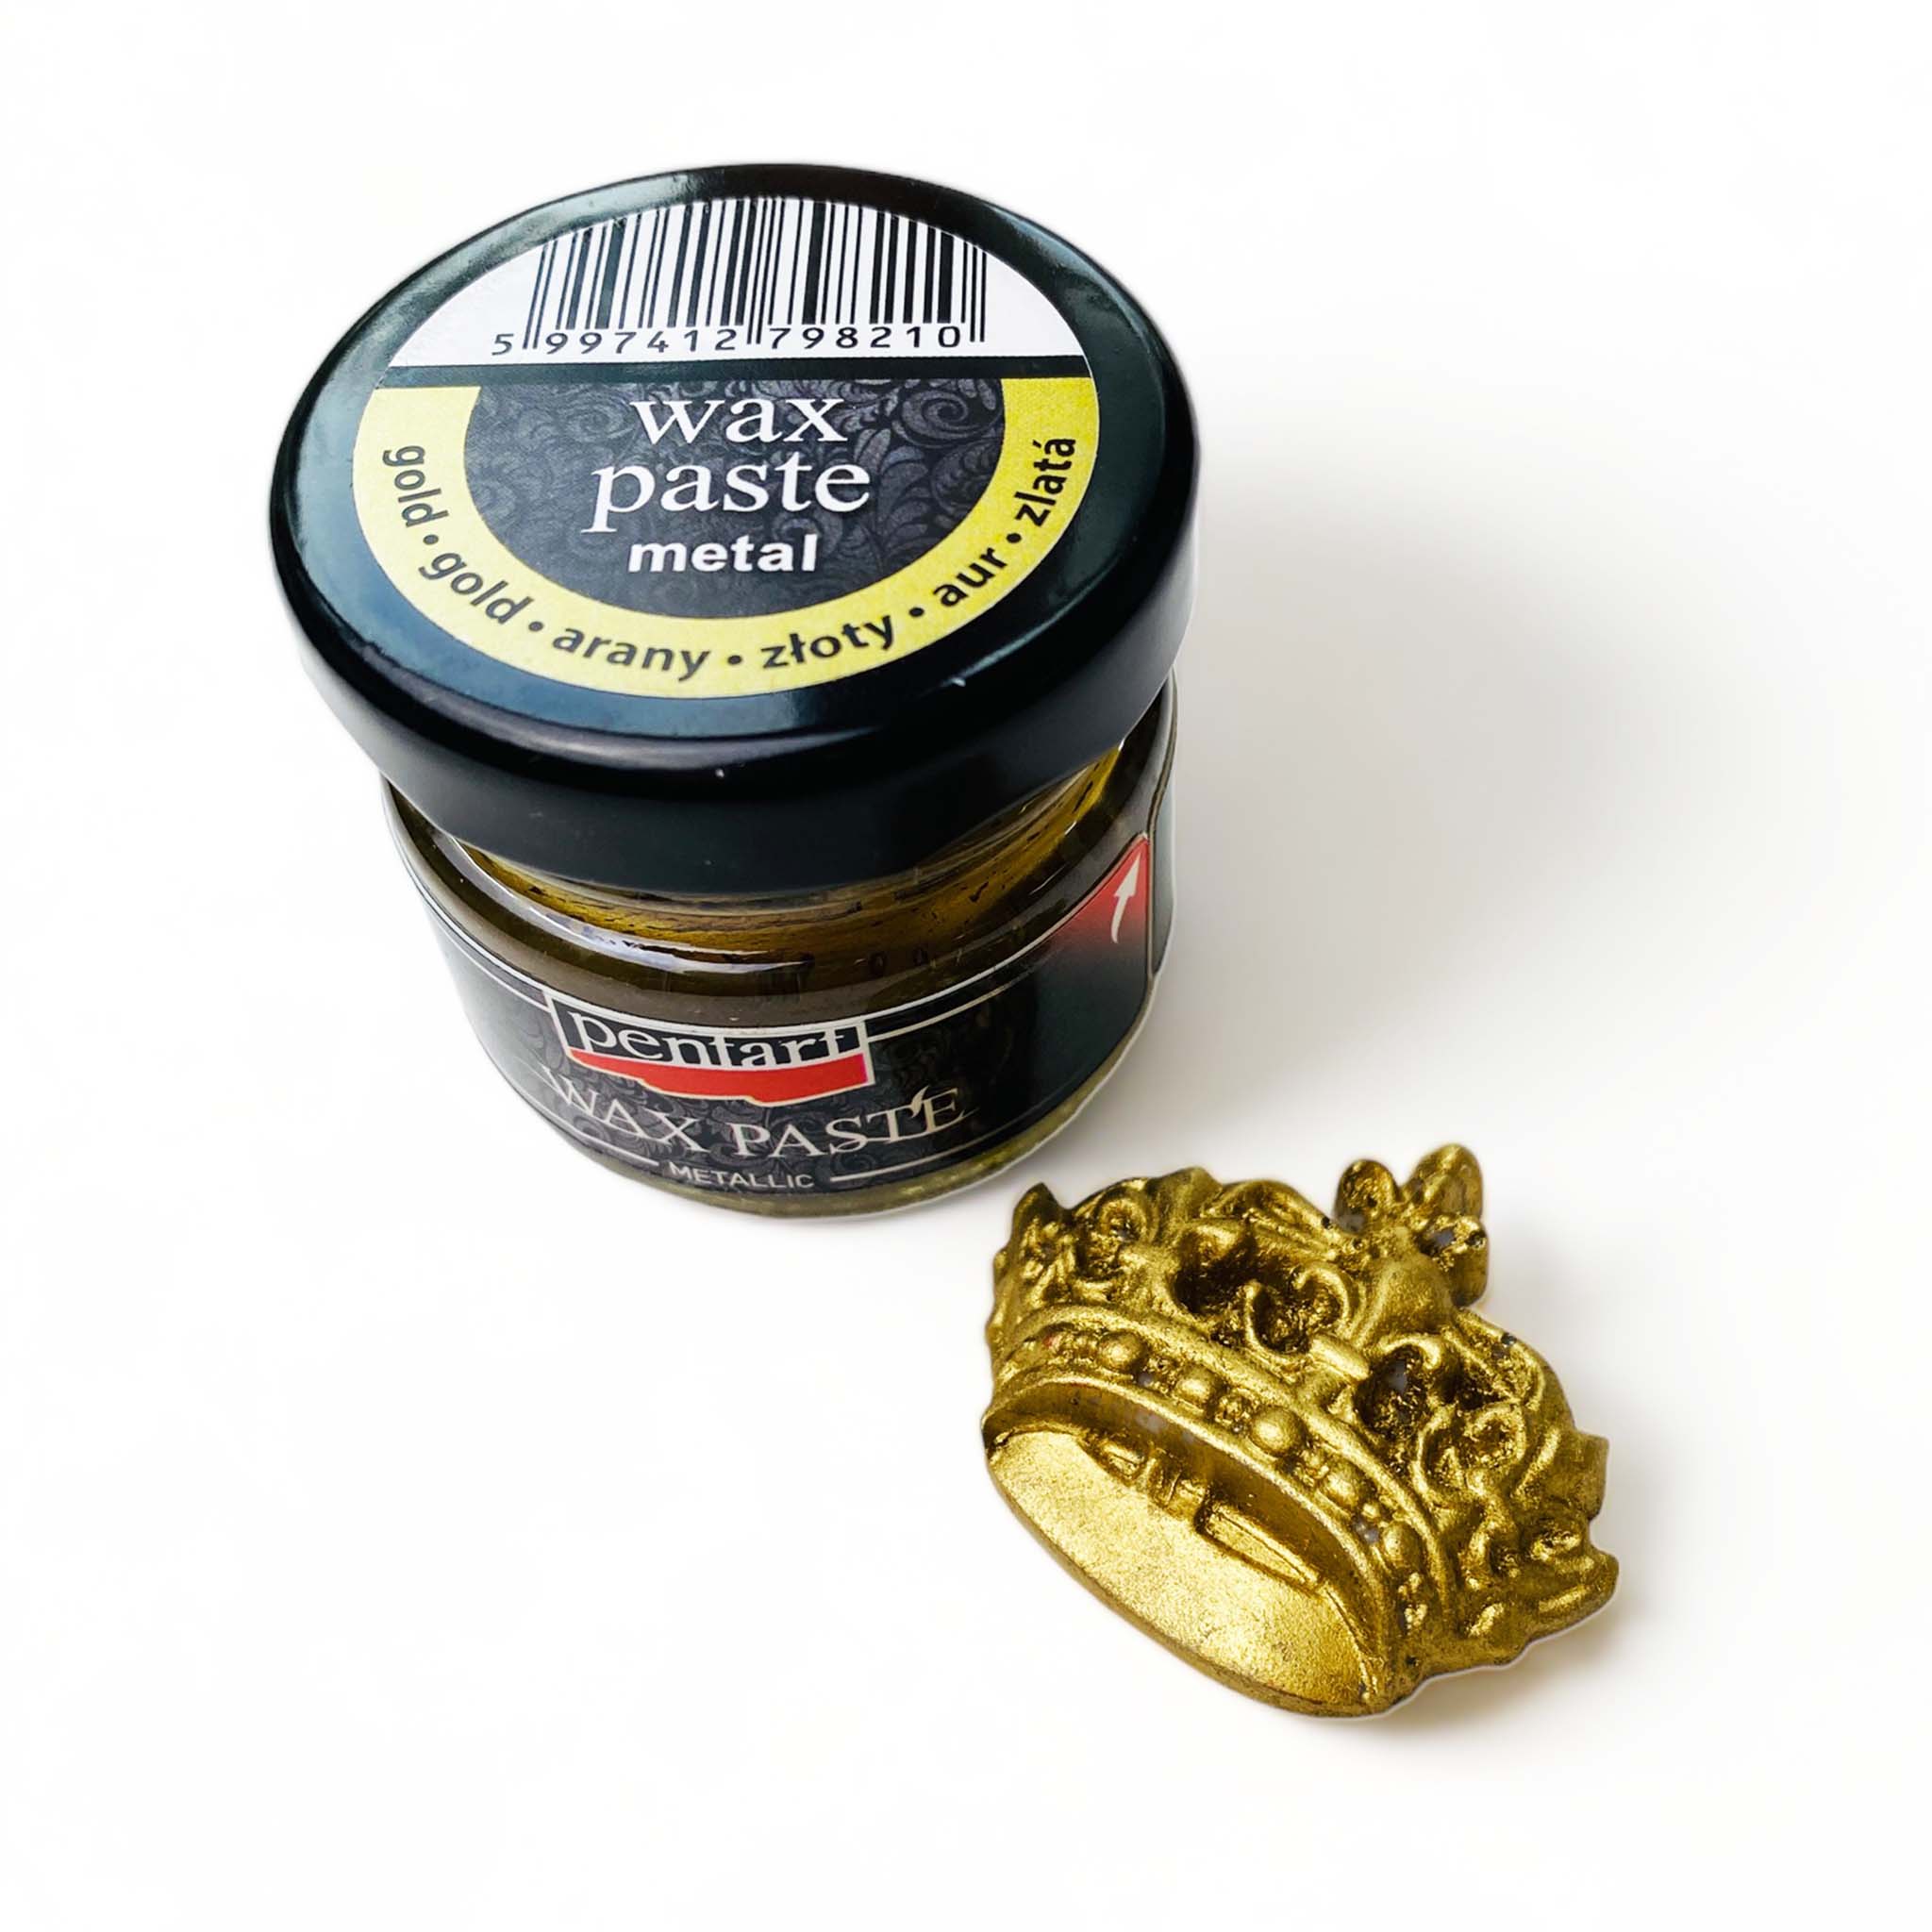 A 0.68 ounce jar of metallic gold wax paste by Pentart is against a white background. A small silicone casting of a crown is shown with the gold wax on it.